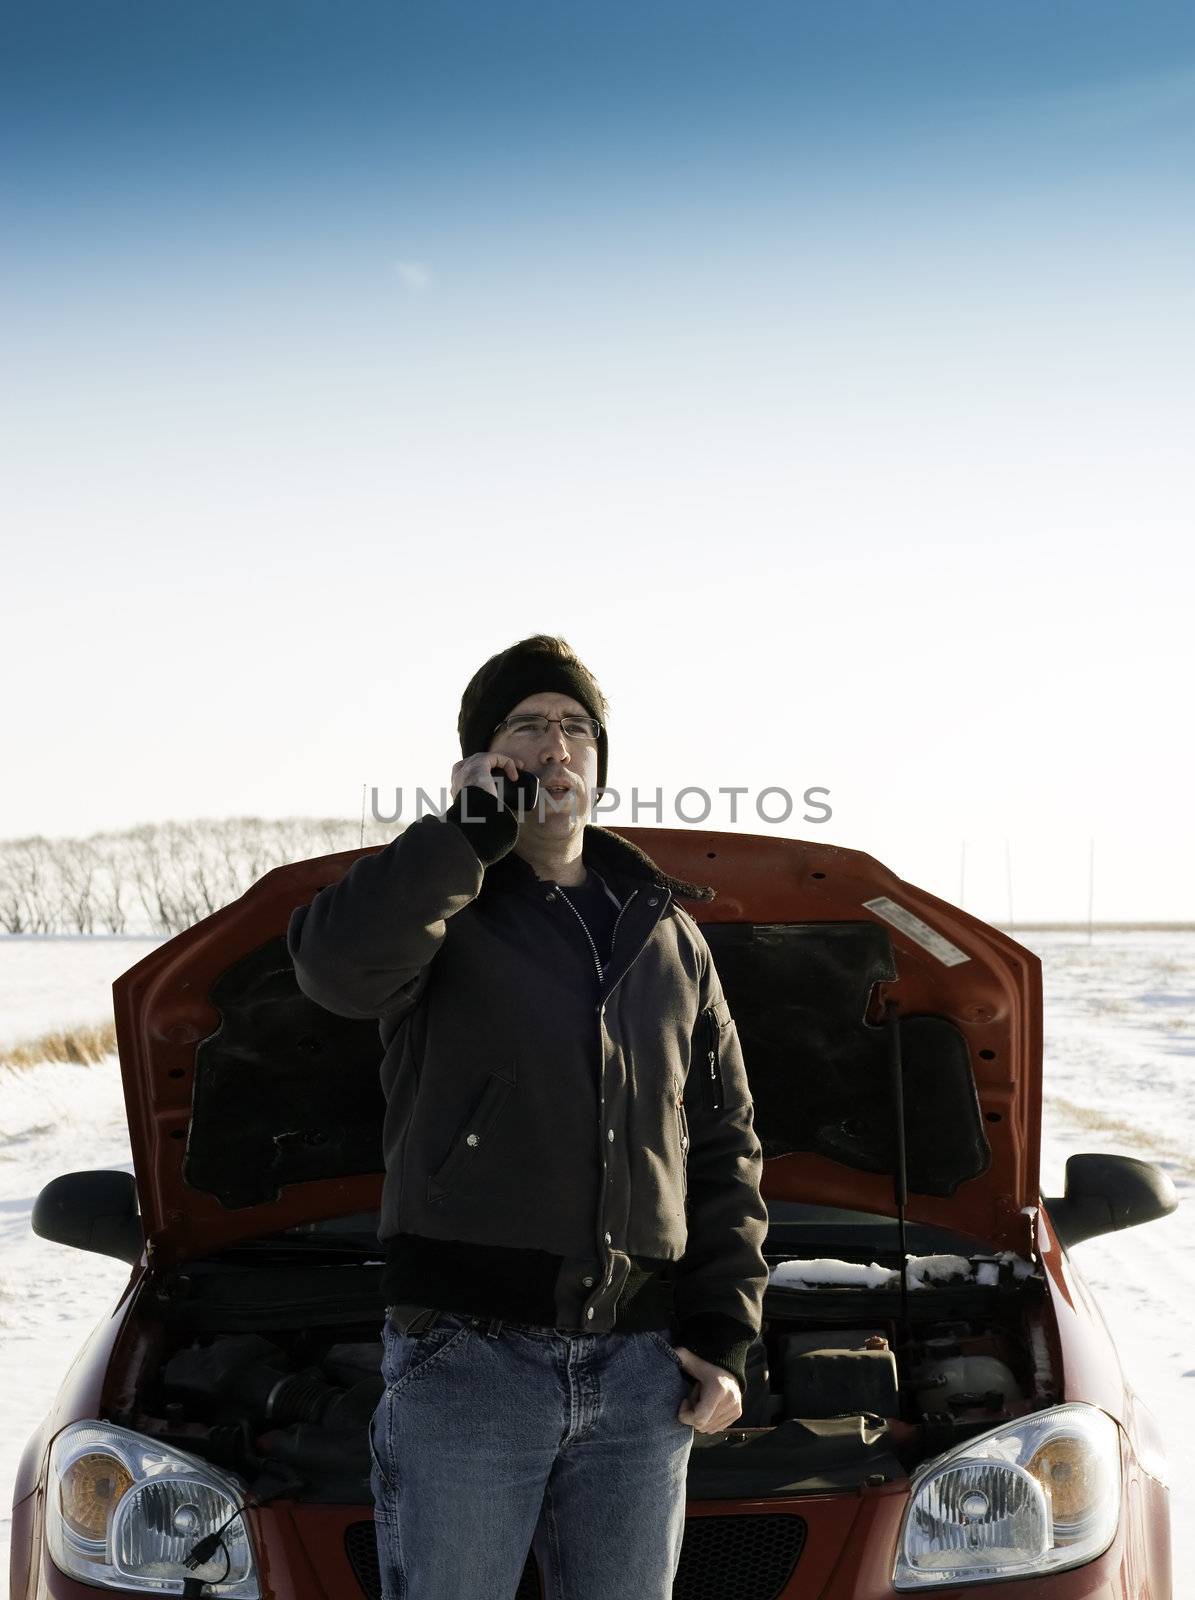 A young man is calling for help on his cell phone, while standing in front of a red car with it's hood up.  Copyspace is available on the top half of the image.